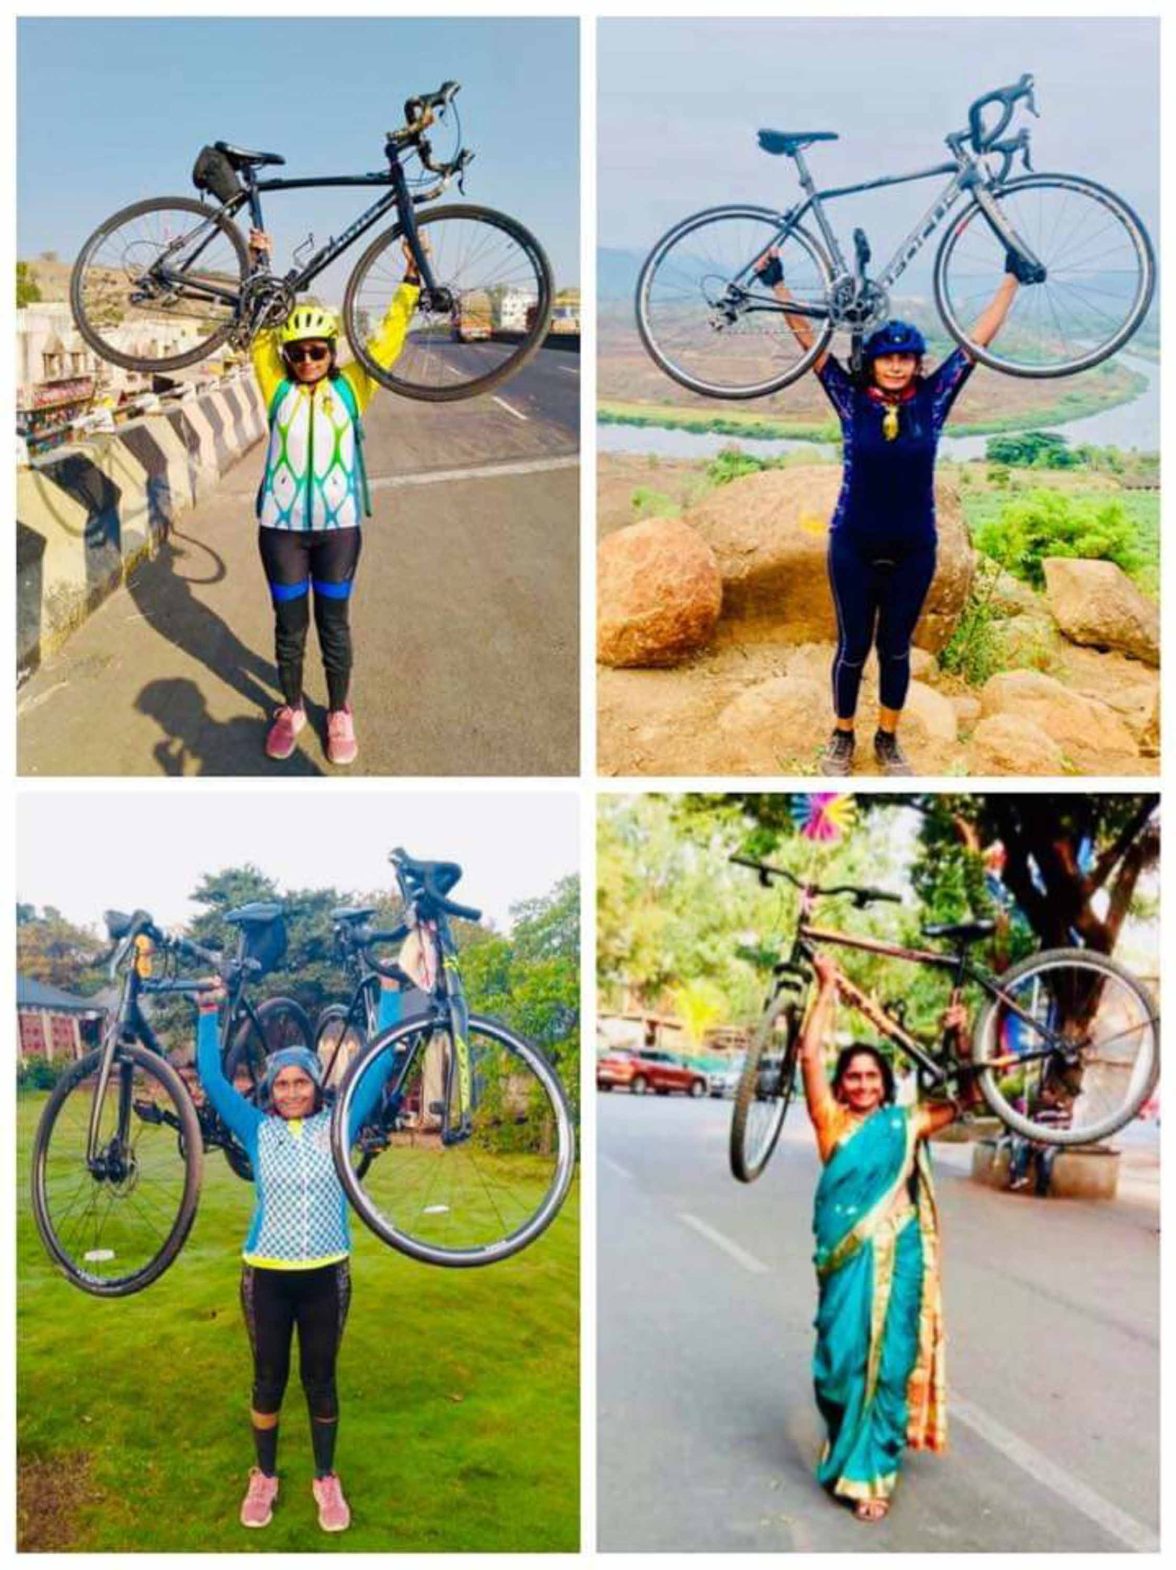 Four photos showing Preeti holding up her bicycle in moments where she has achieved success in her ride.